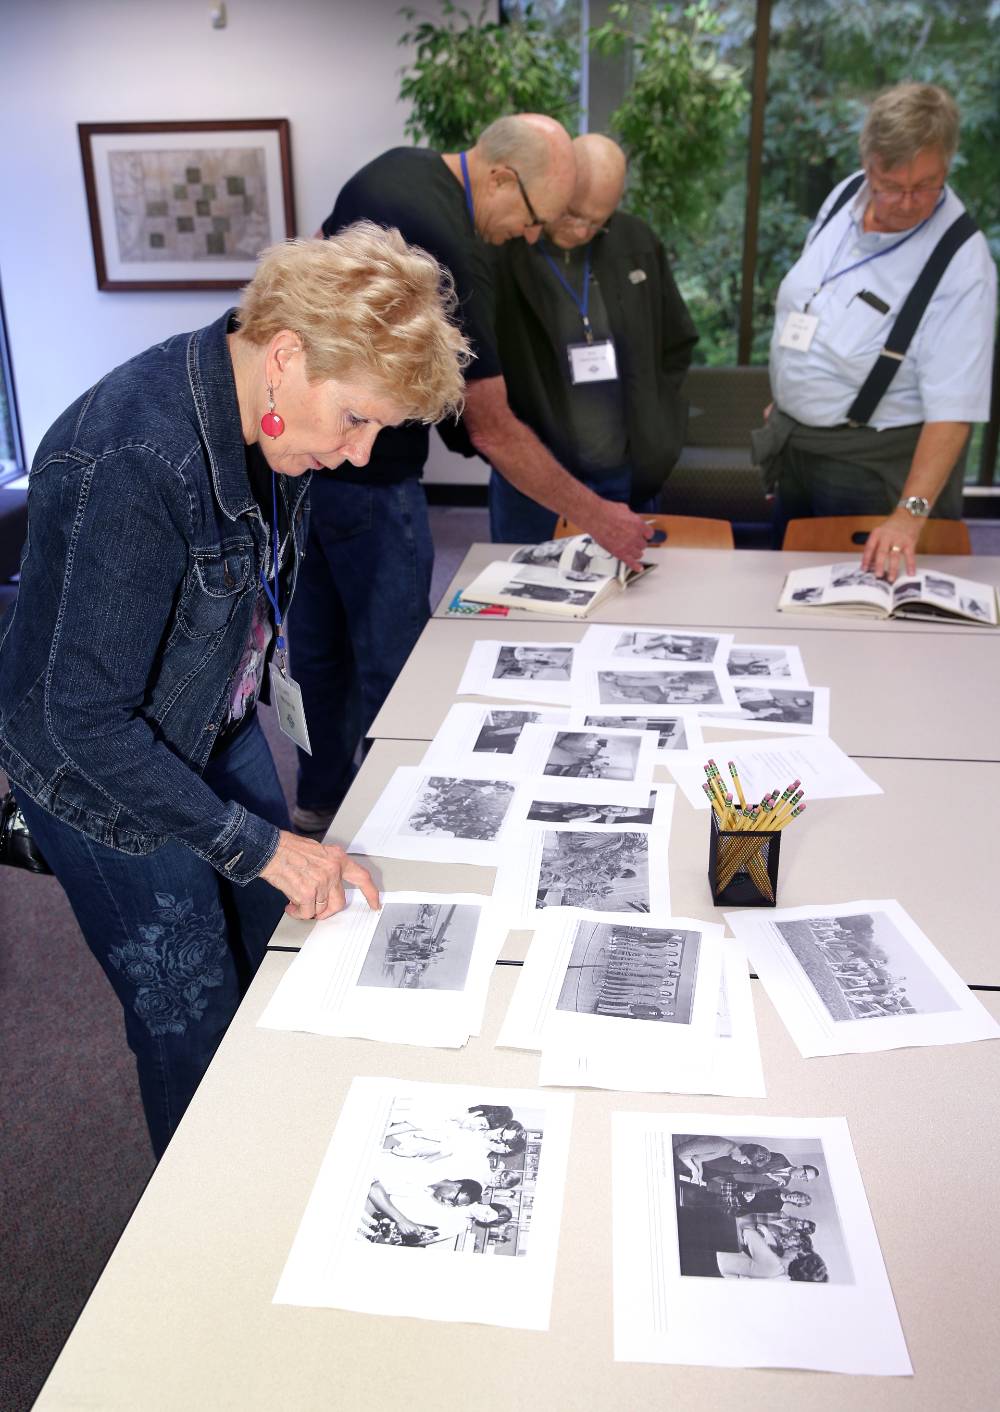 An alumna looking at old photos from 1968.